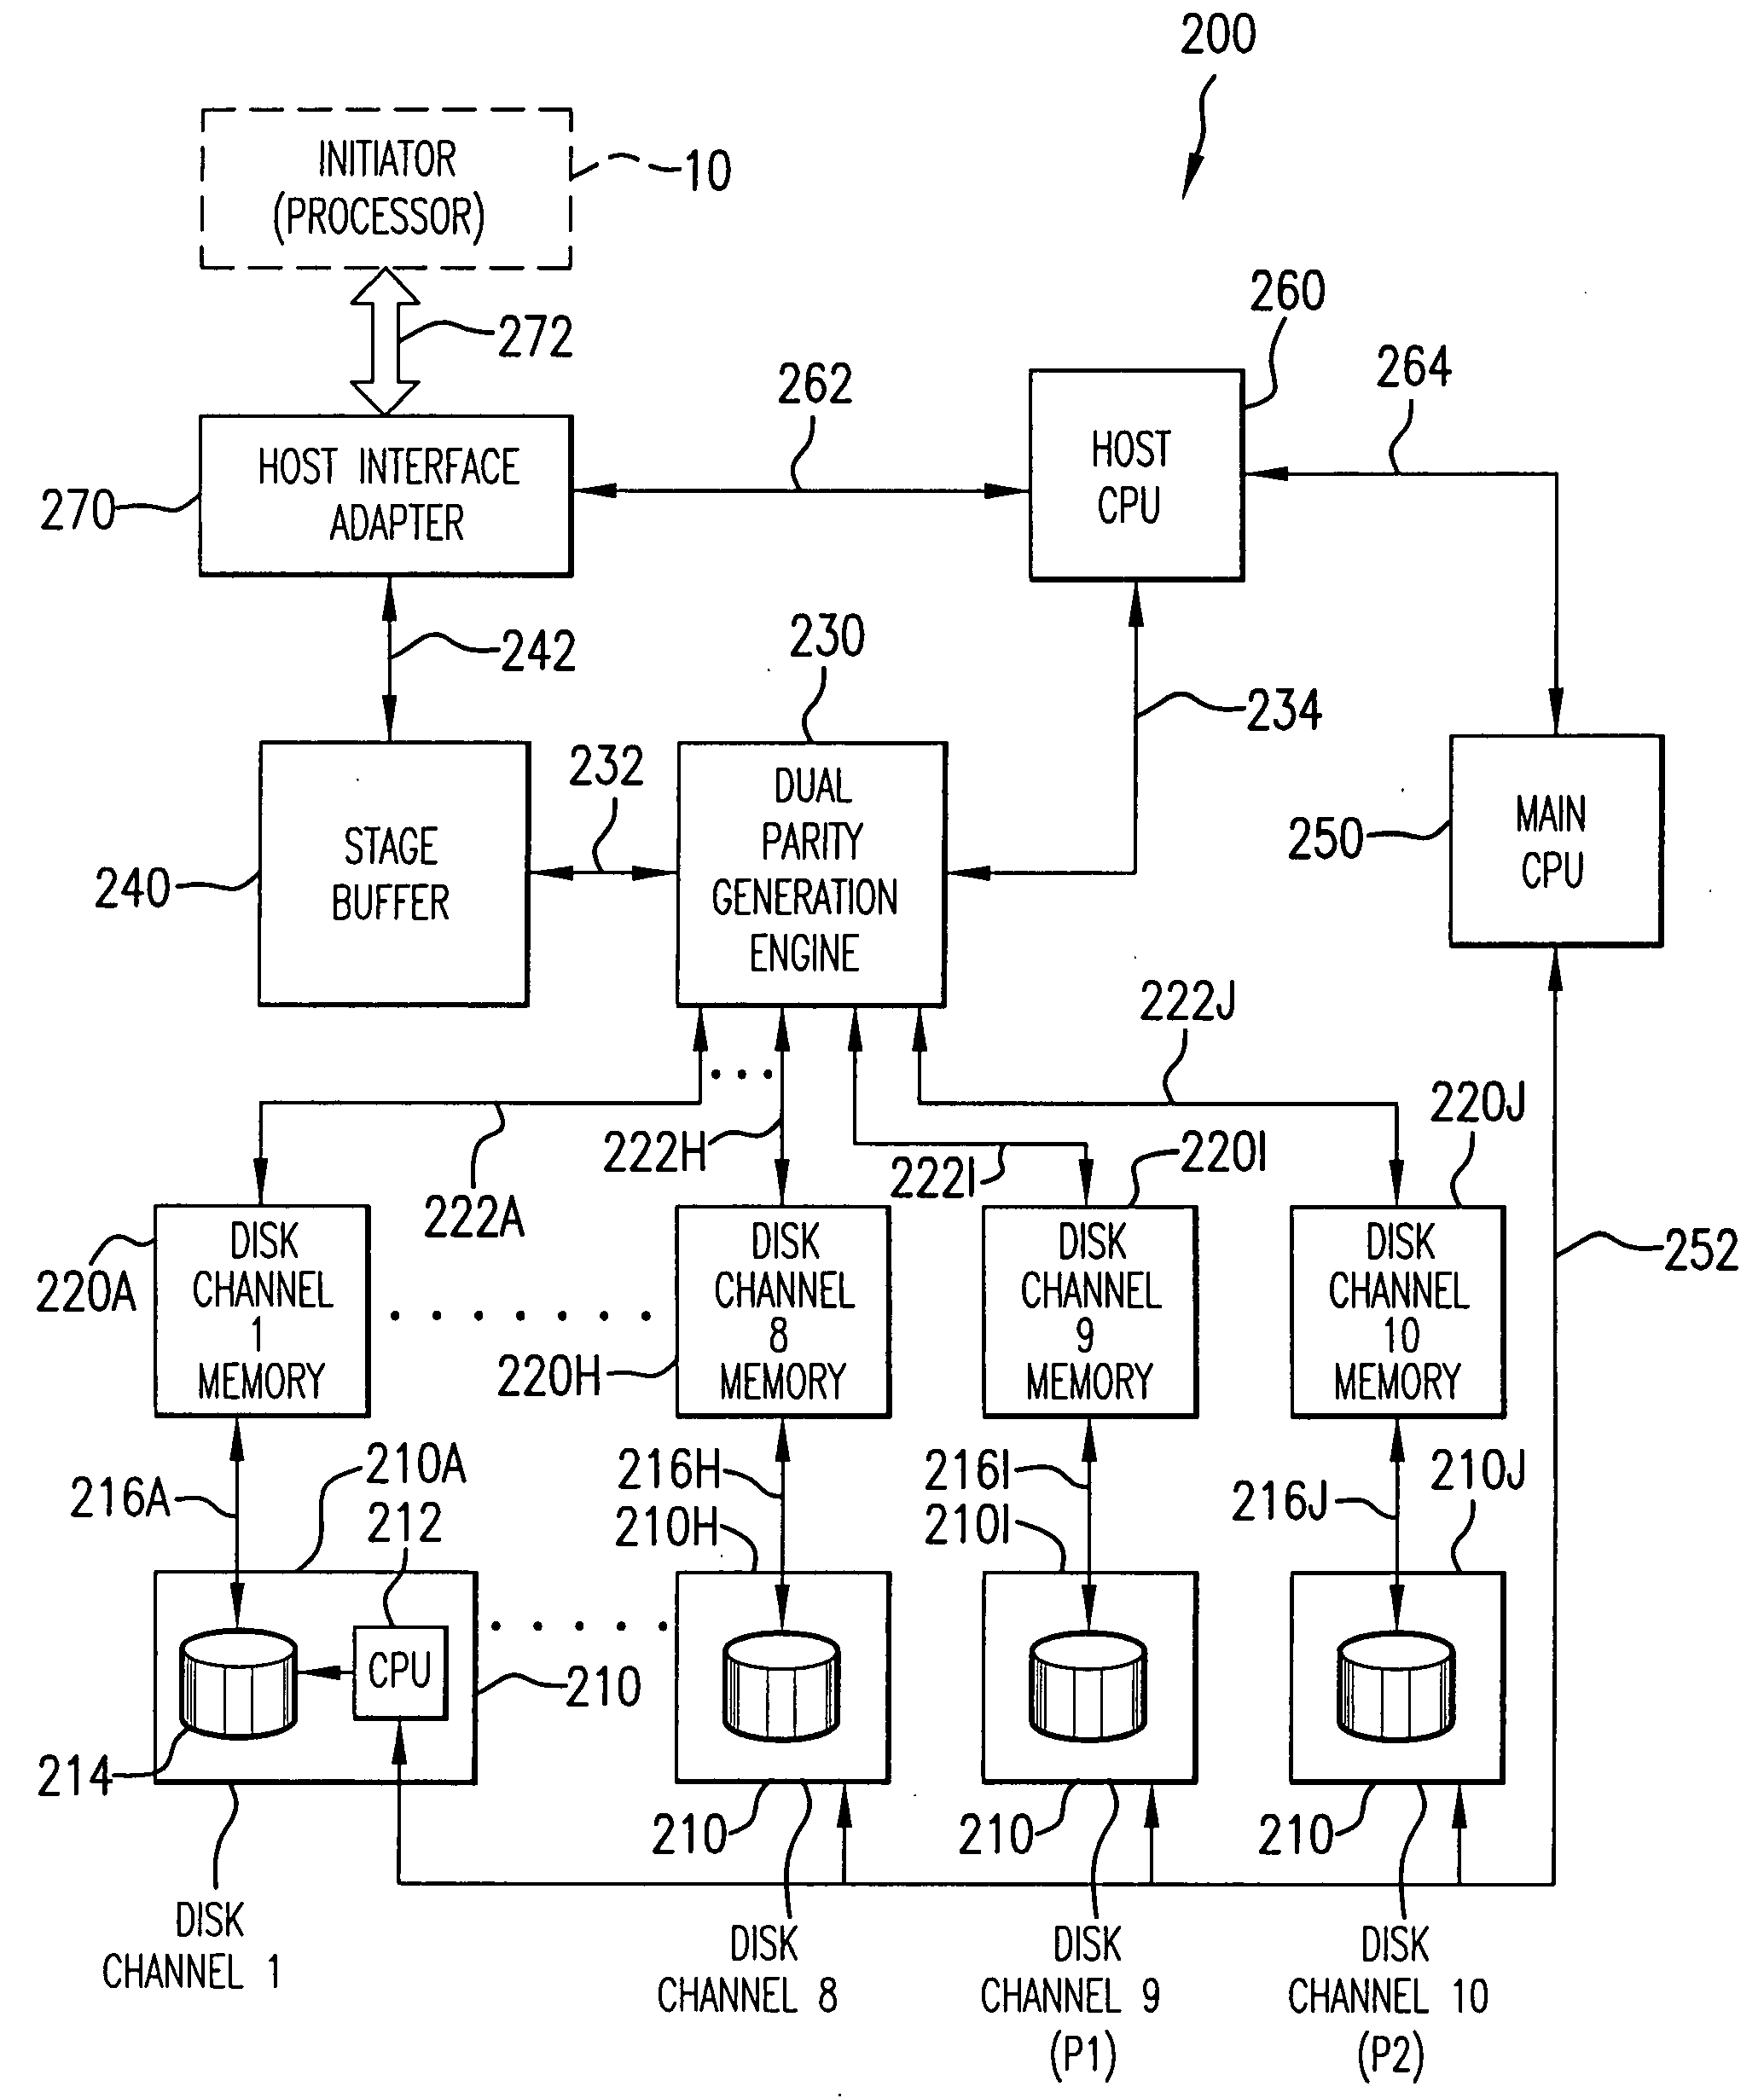 Method for reducing latency in a raid memory system while maintaining data integrity